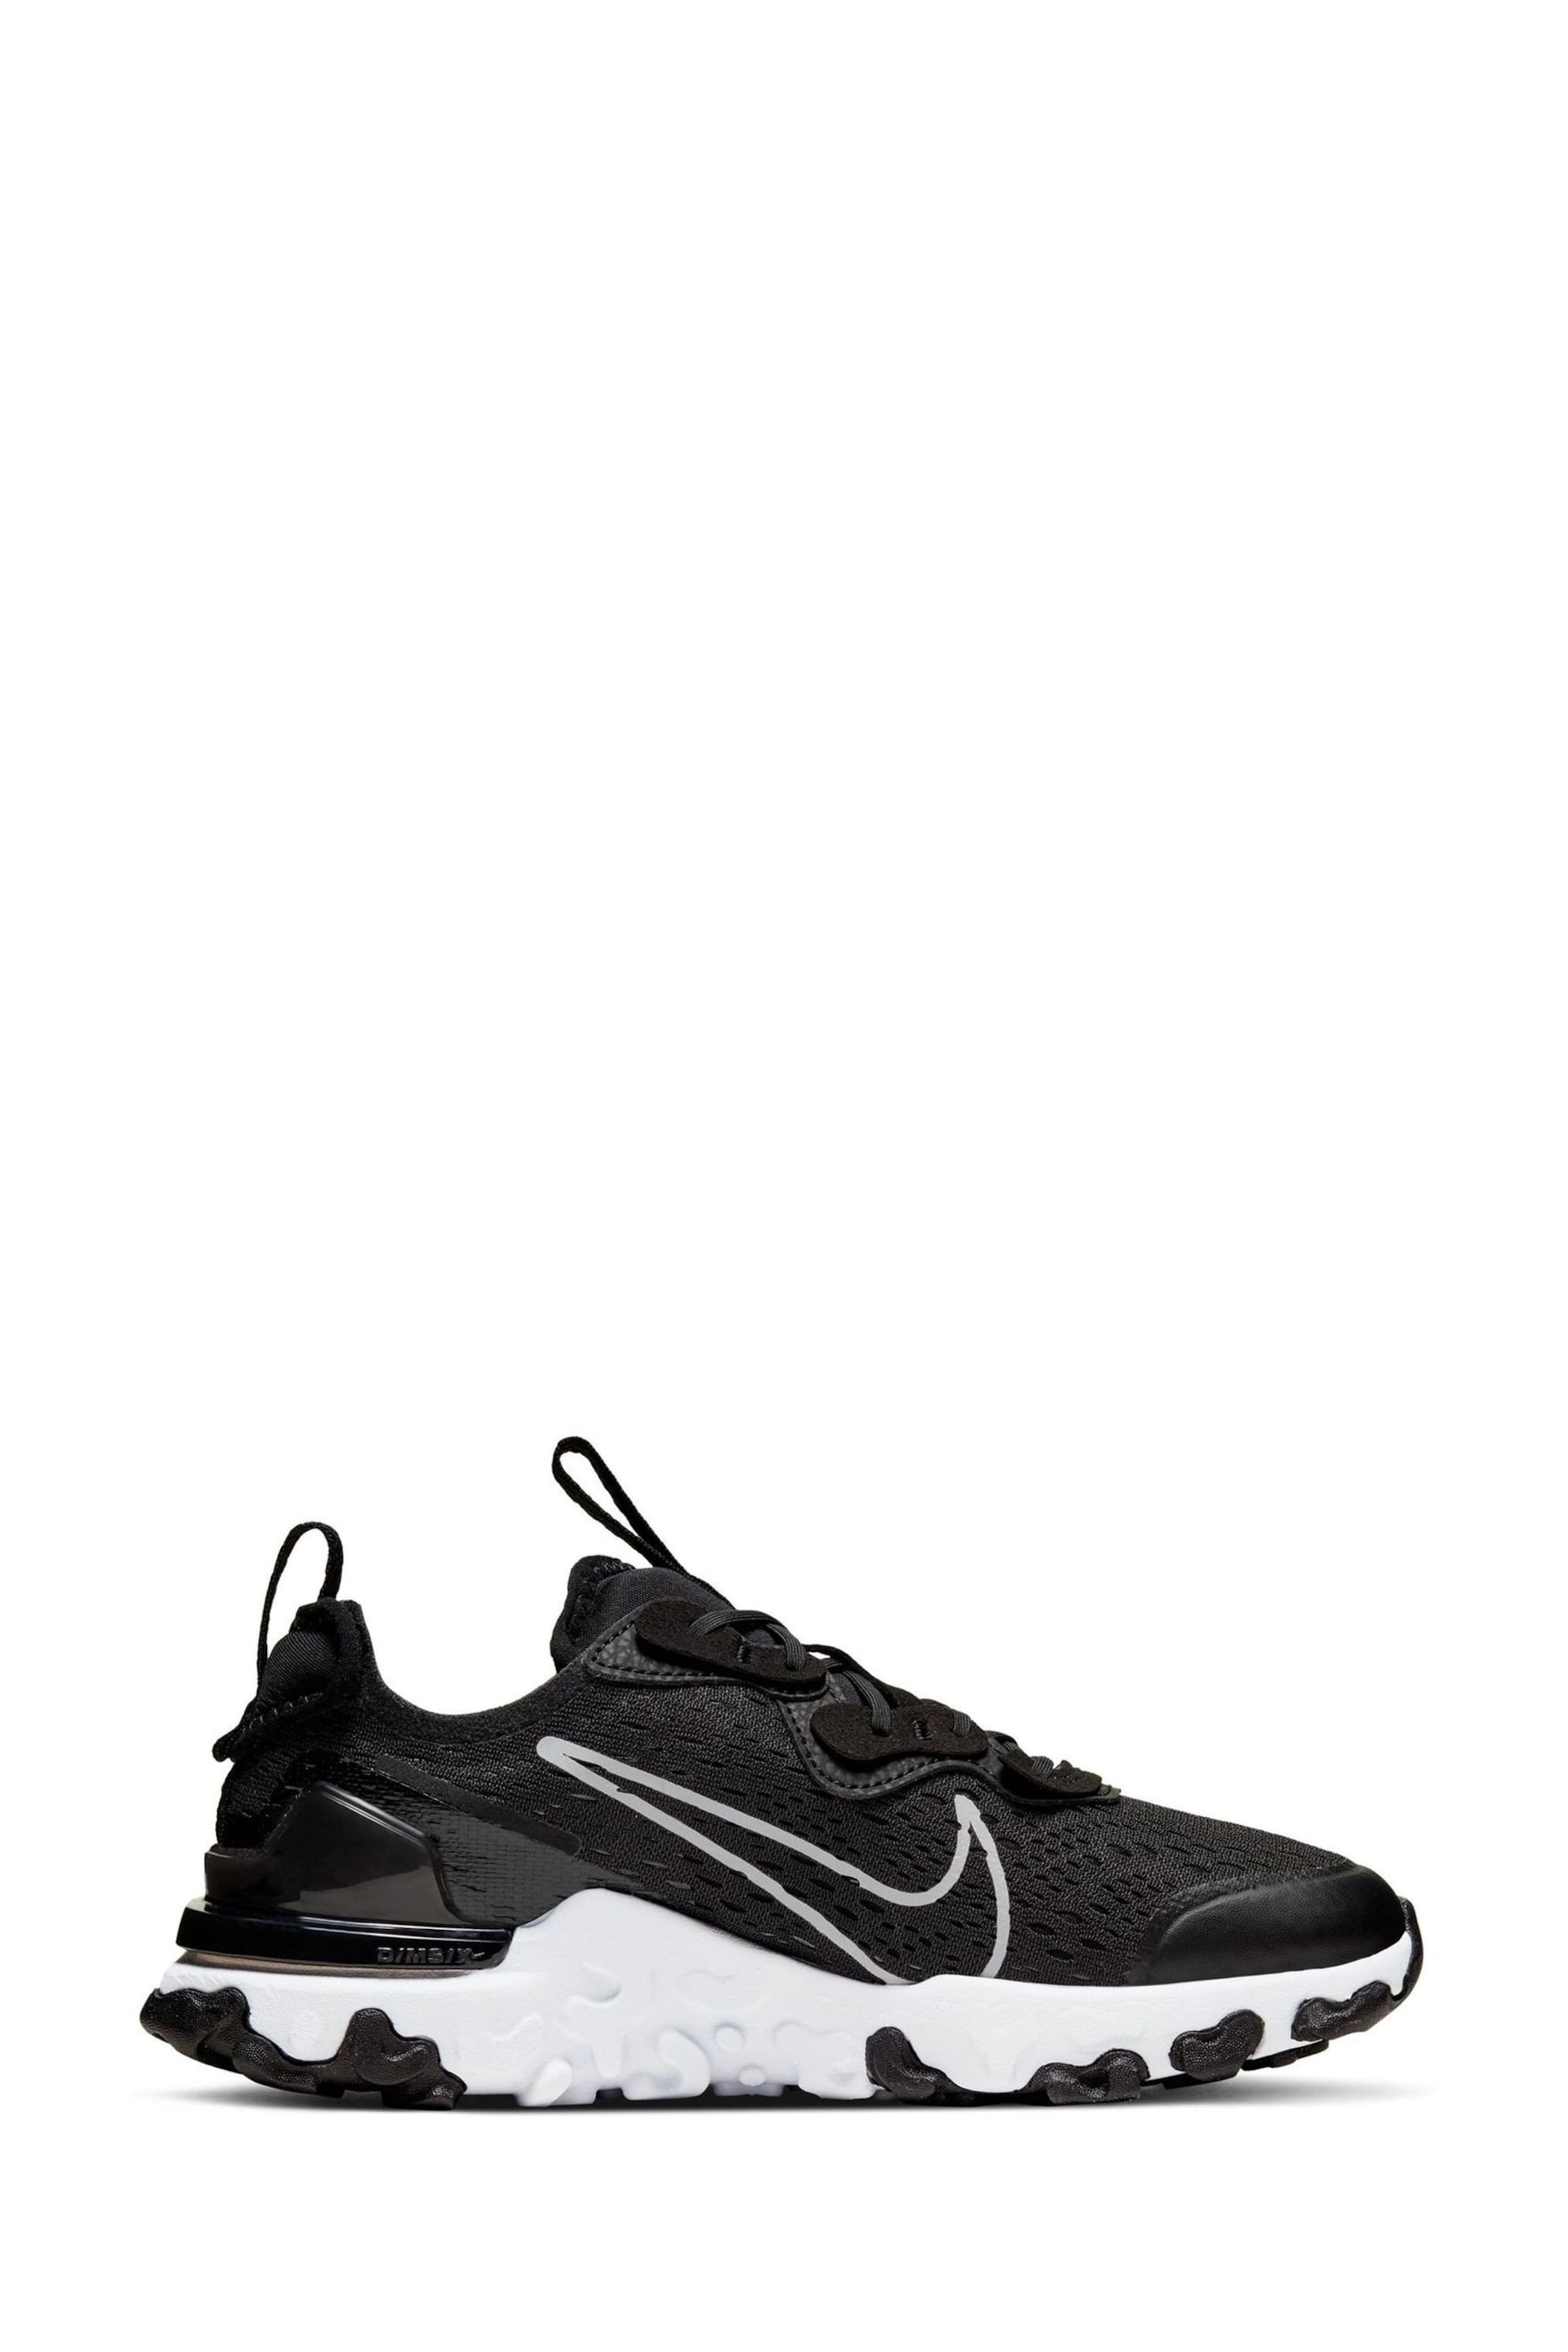 Nike Black/White React Vision Youth Trainers - Image 2 of 4